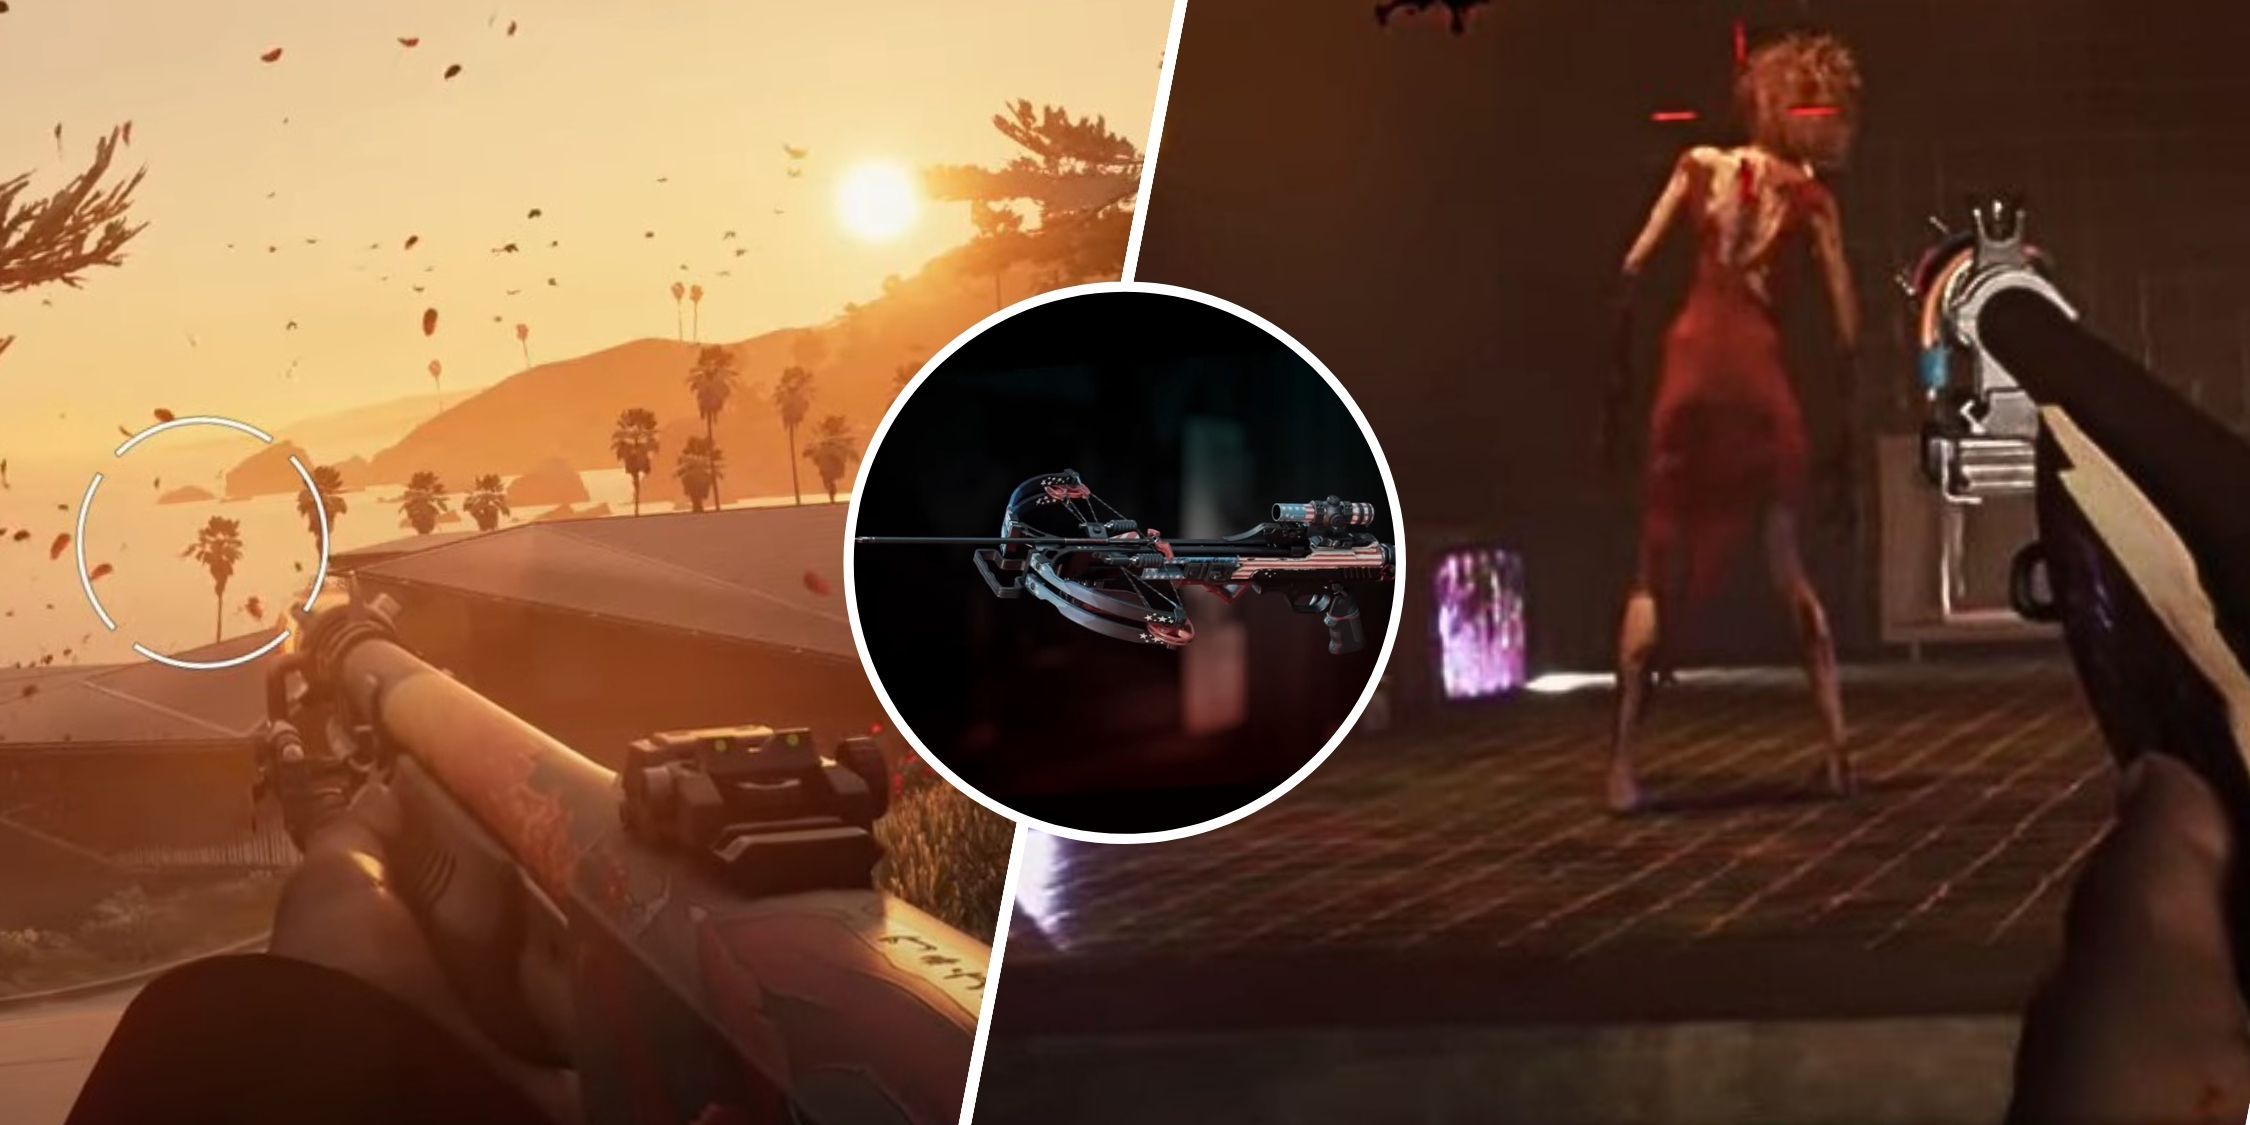 The Dead Island 2 character found the Forget Me Not key and received a new crossbow in the Haus DLC. 